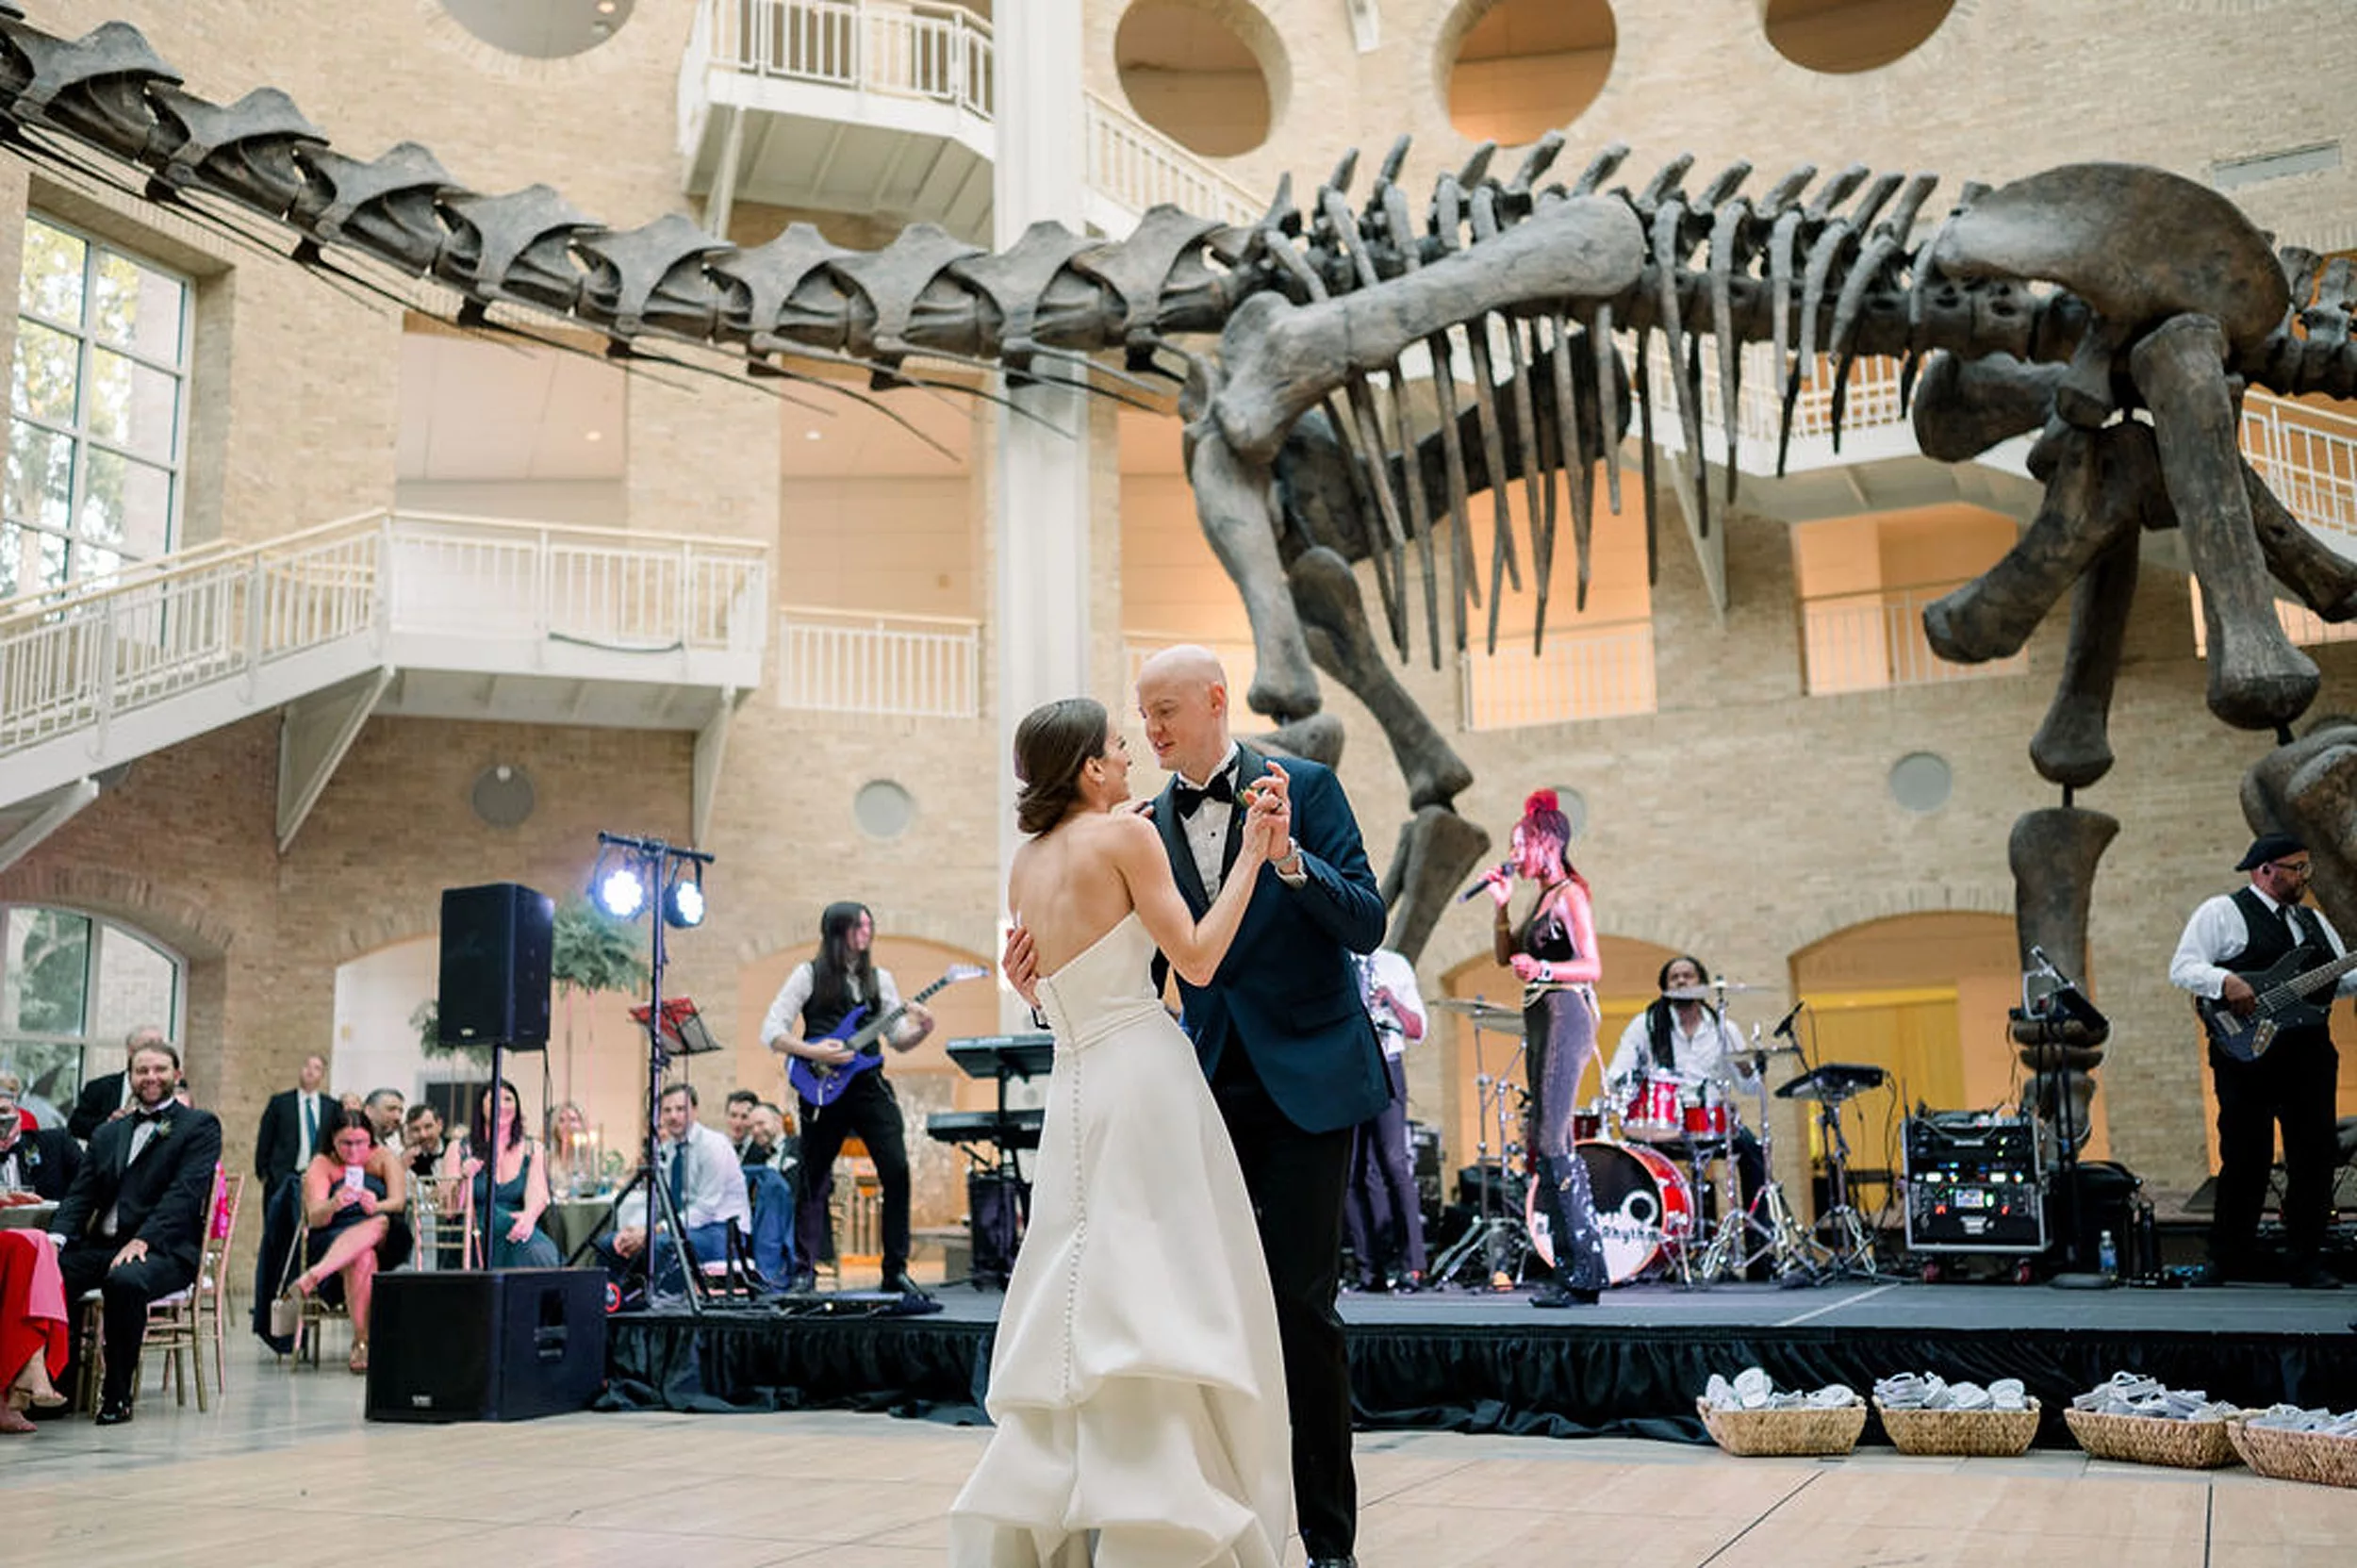 Newlyweds dance as a band plays under a real dinosaur skeleton and their guests look on